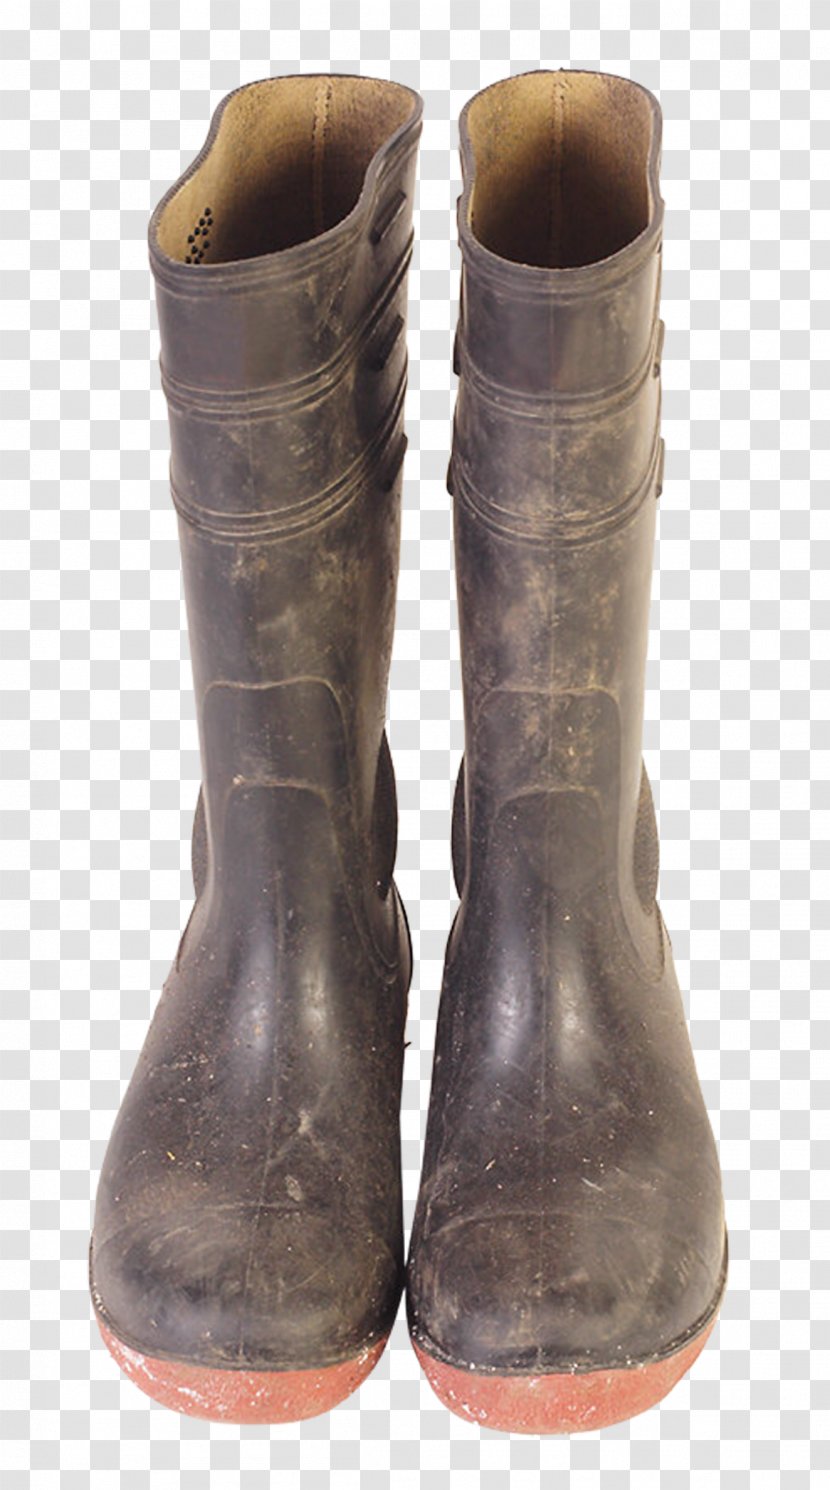 Cowboy Boot Shoe - Snow - Being Put Boots Transparent PNG